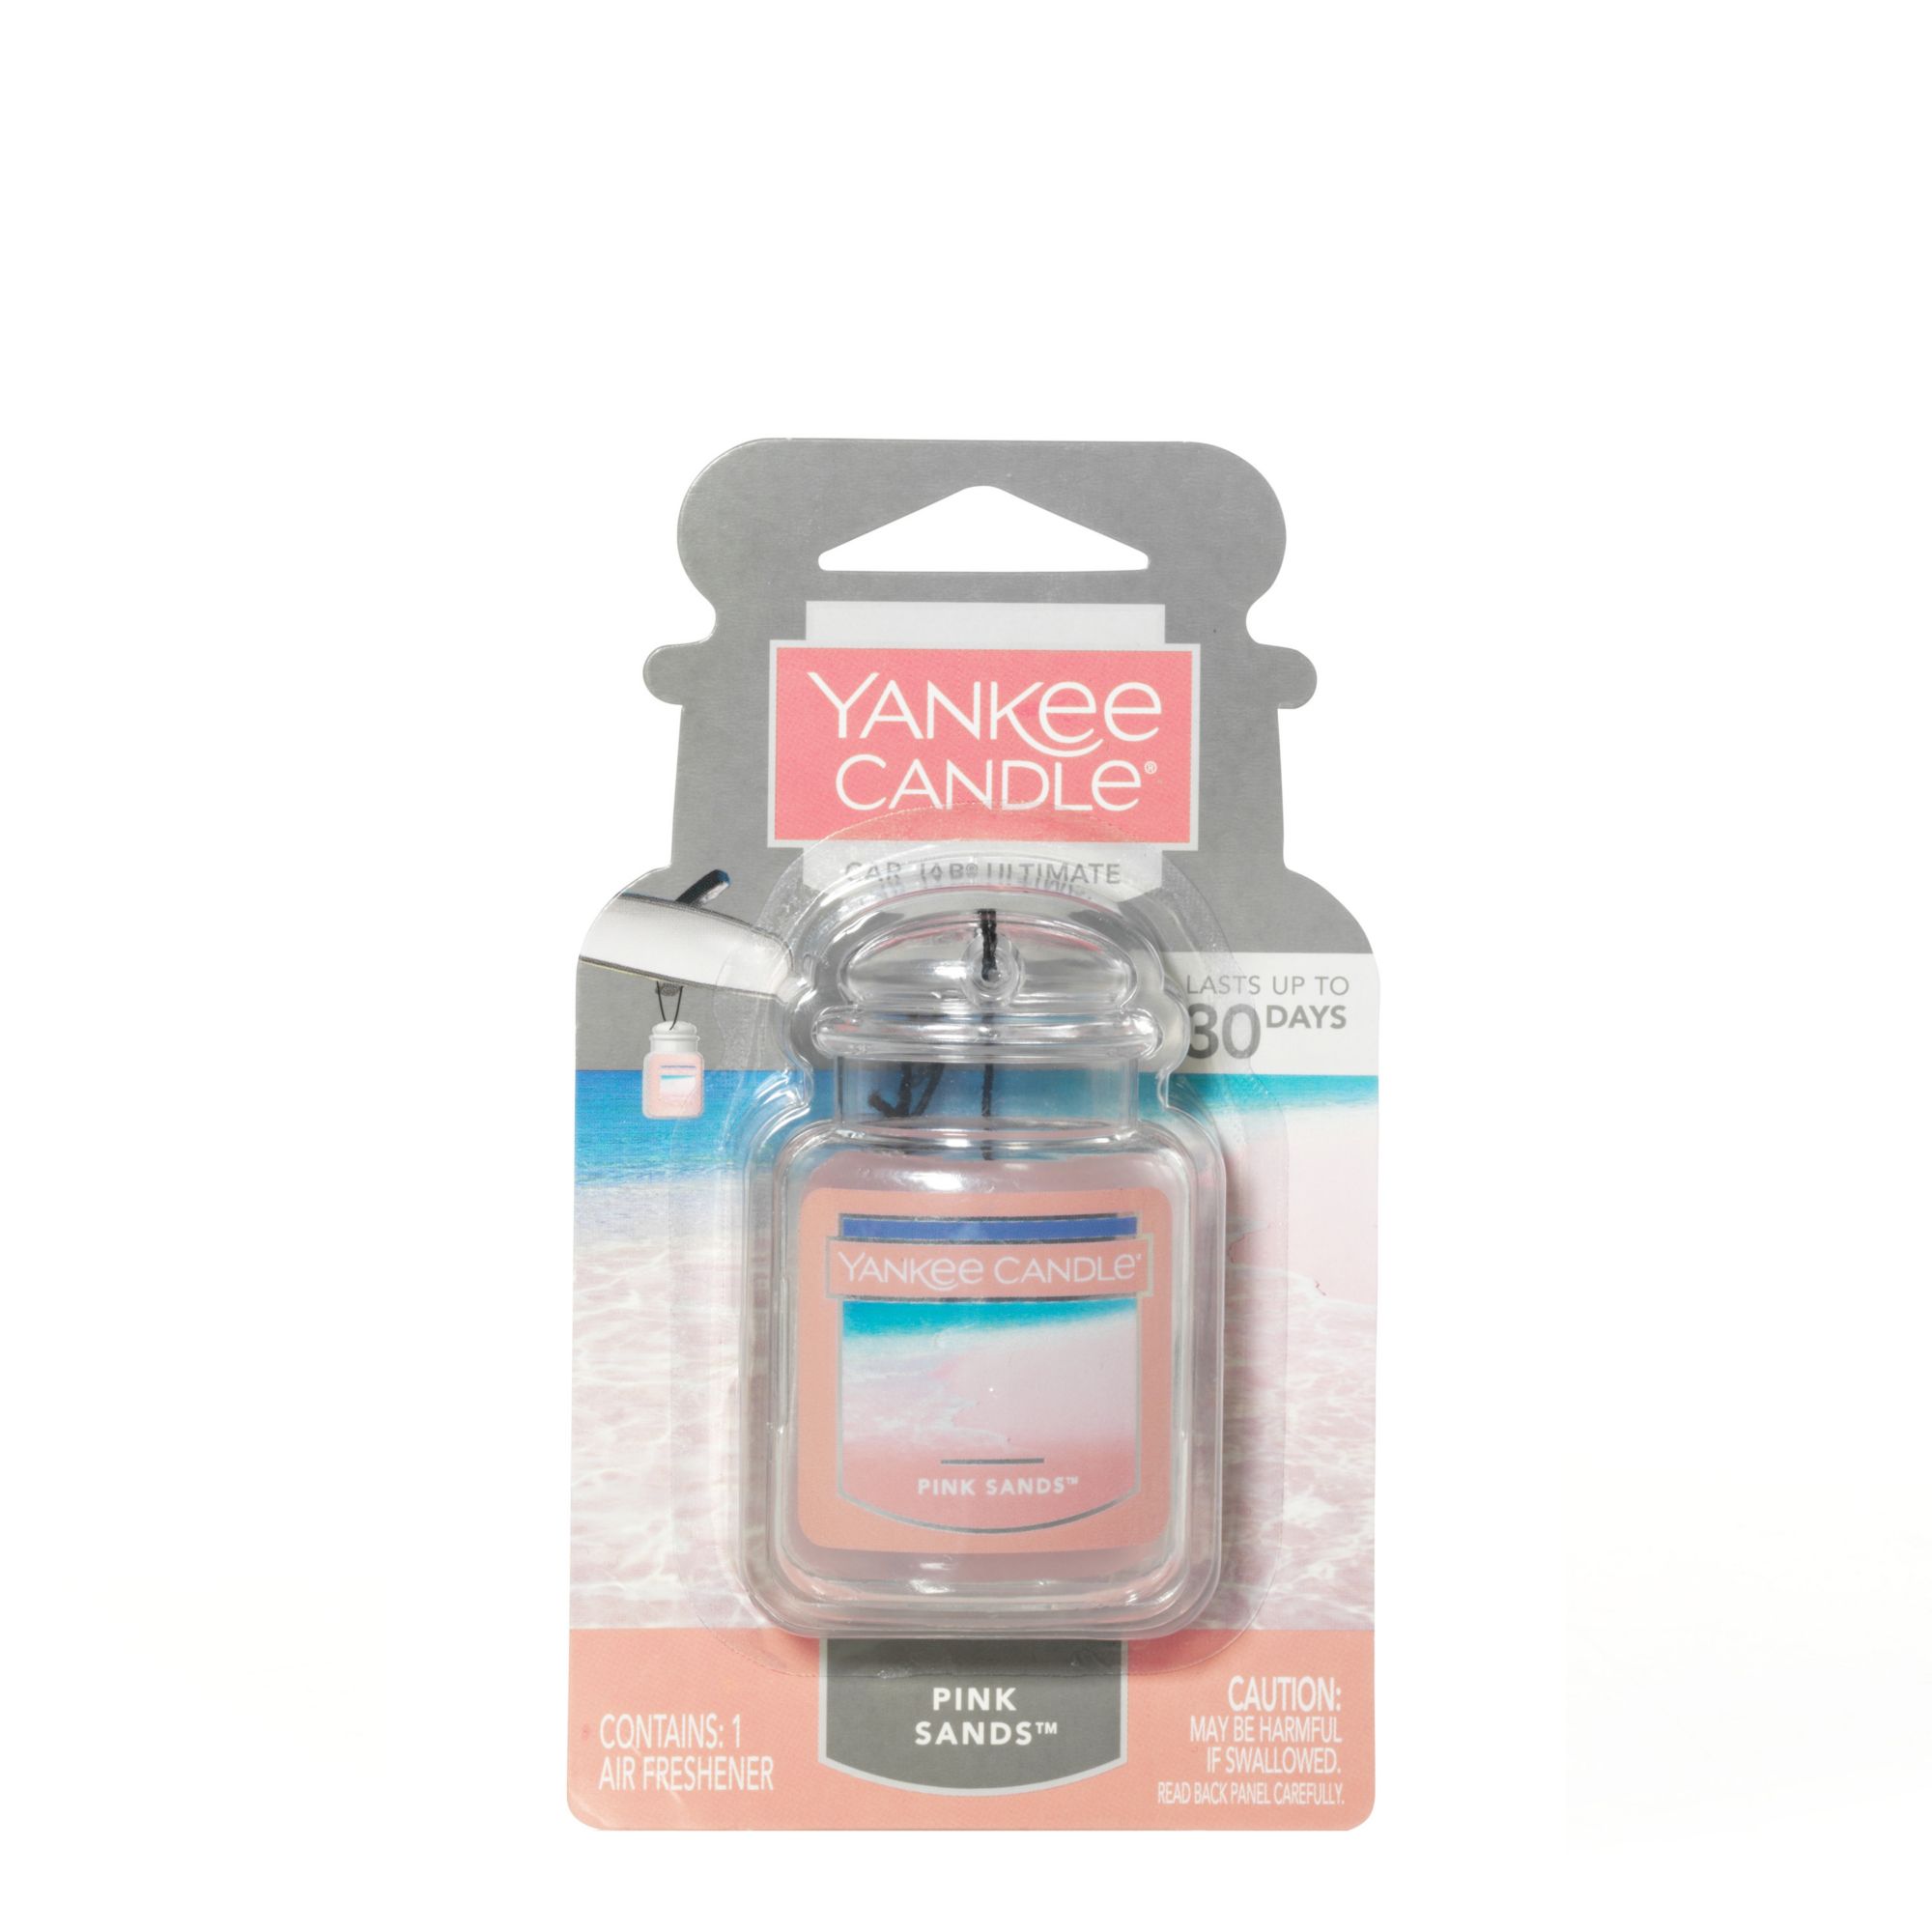 Yankee Candle Plug Refill Set, 2 pc - Pink Sands